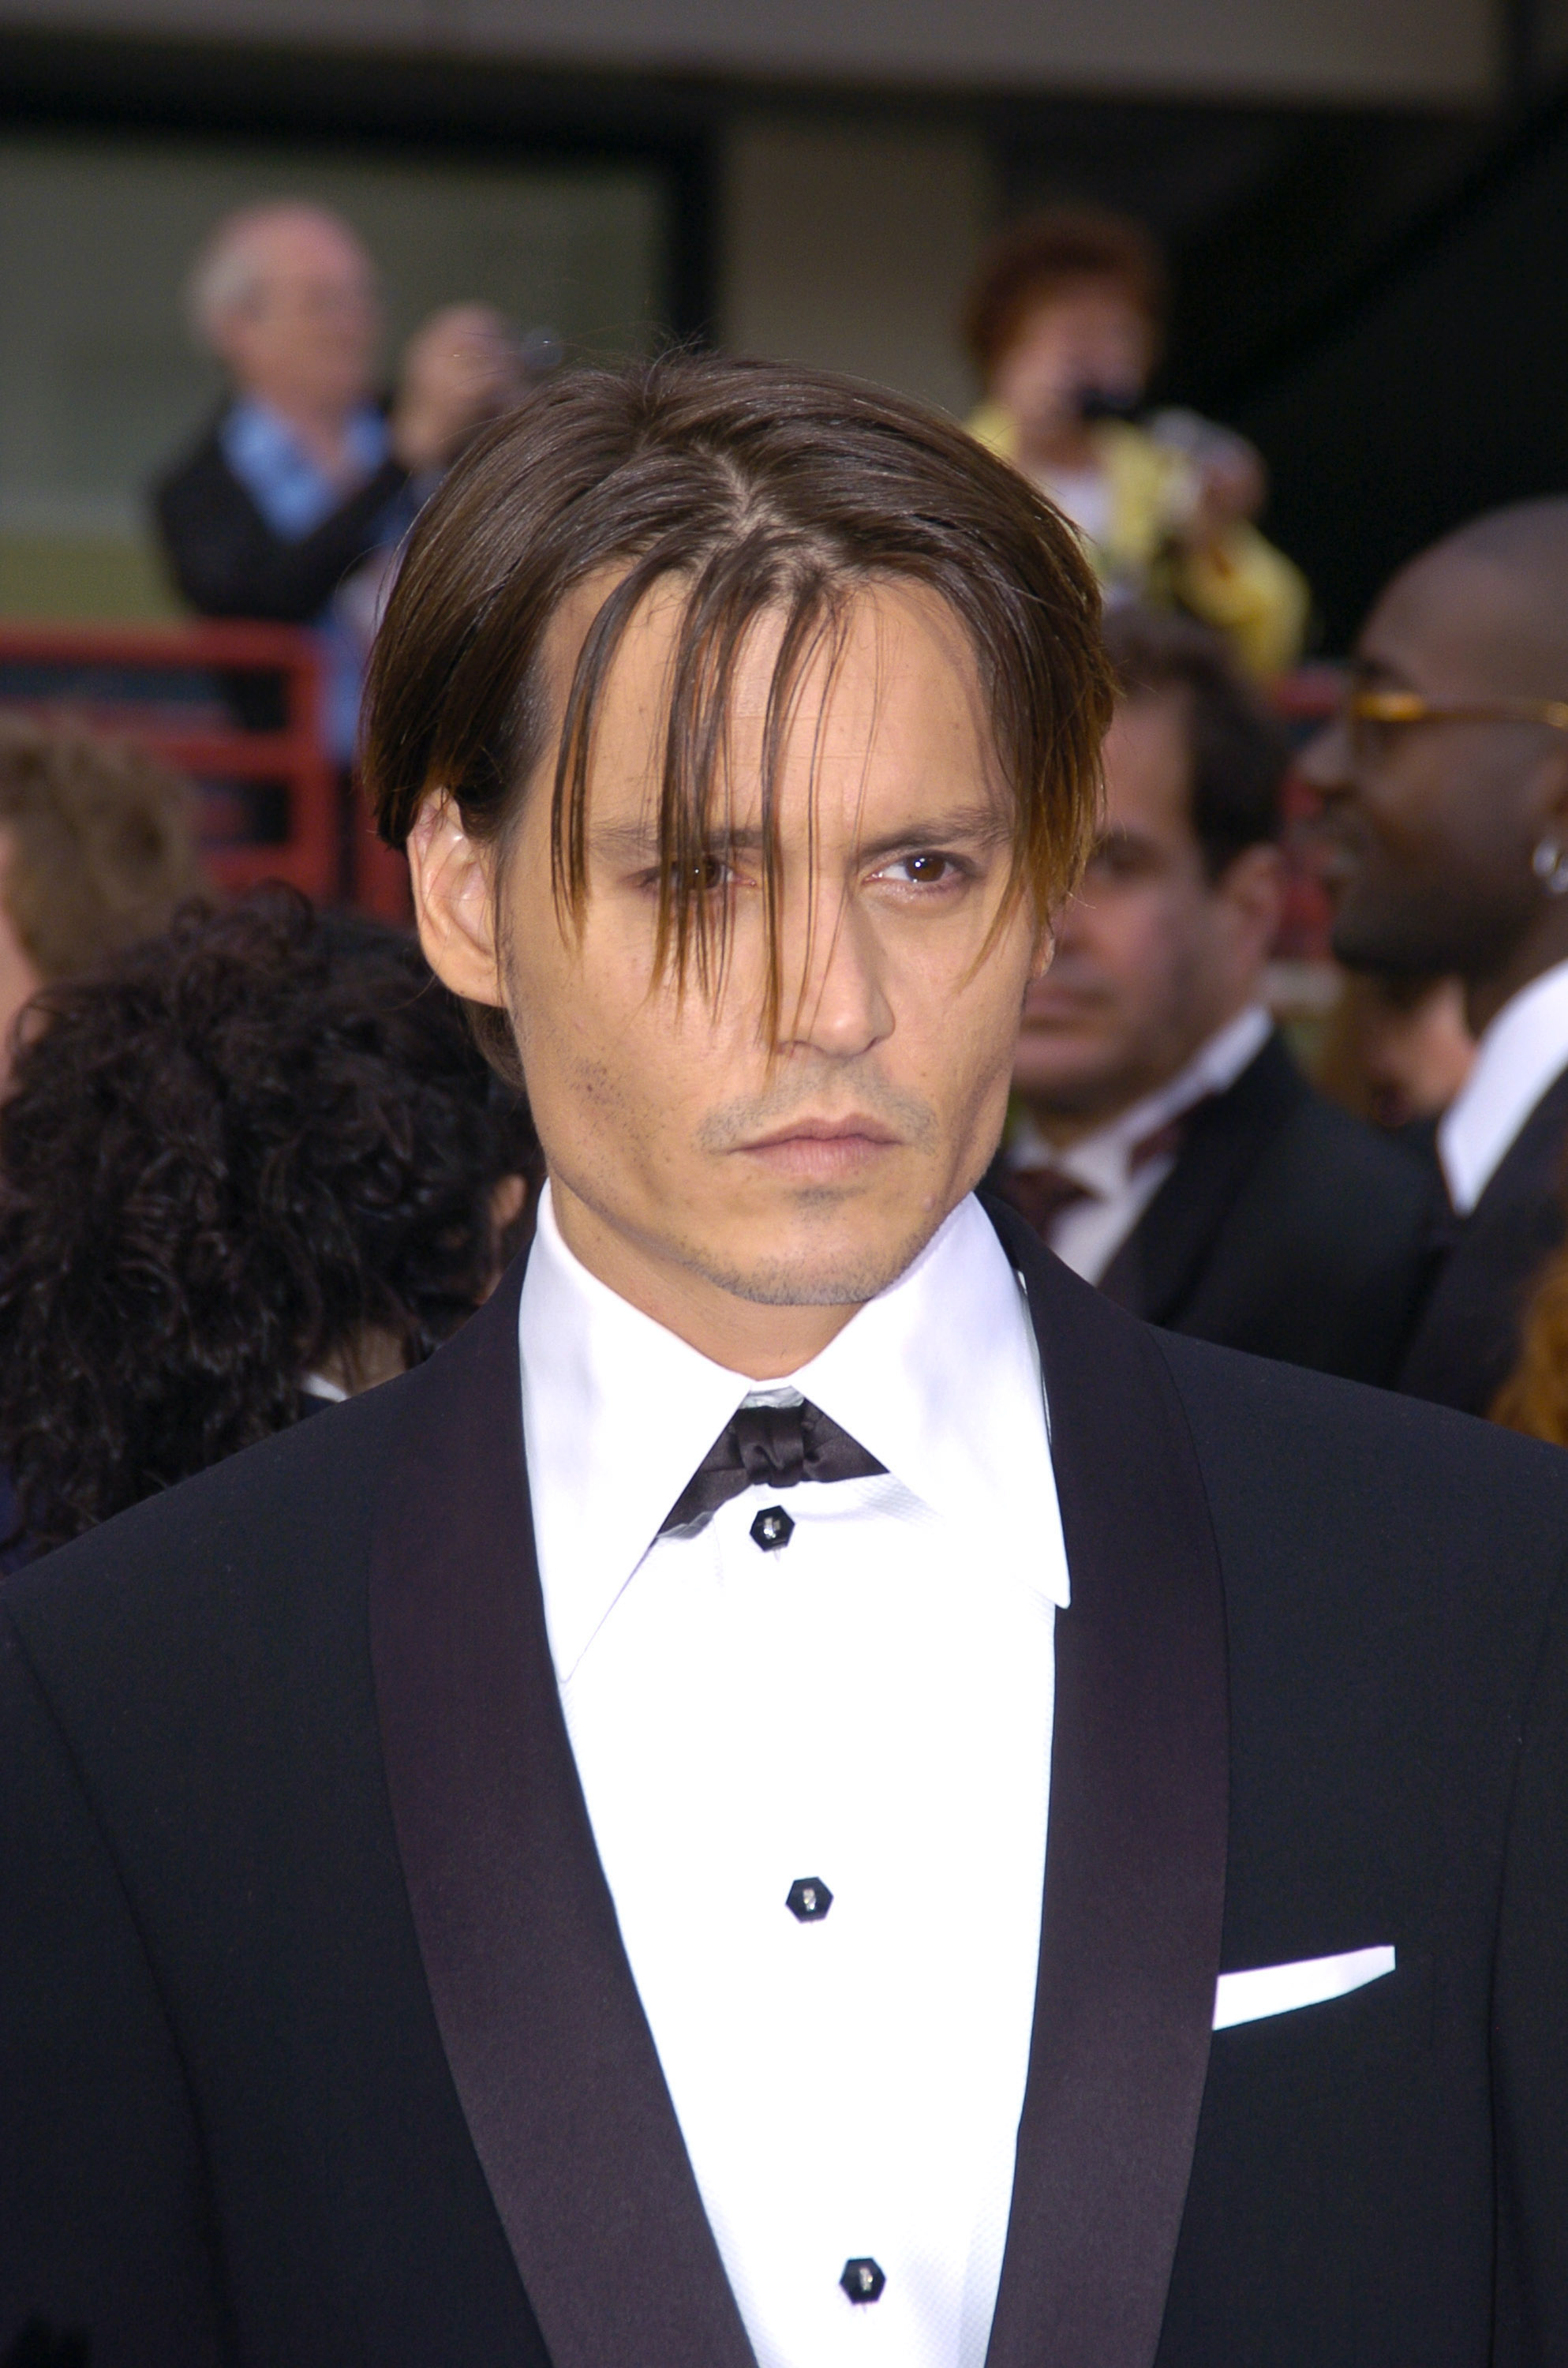 Johnny Depp at the 76th Annual Academy Awards in Hollywood, California on February 29, 2004 | Source: Getty Images